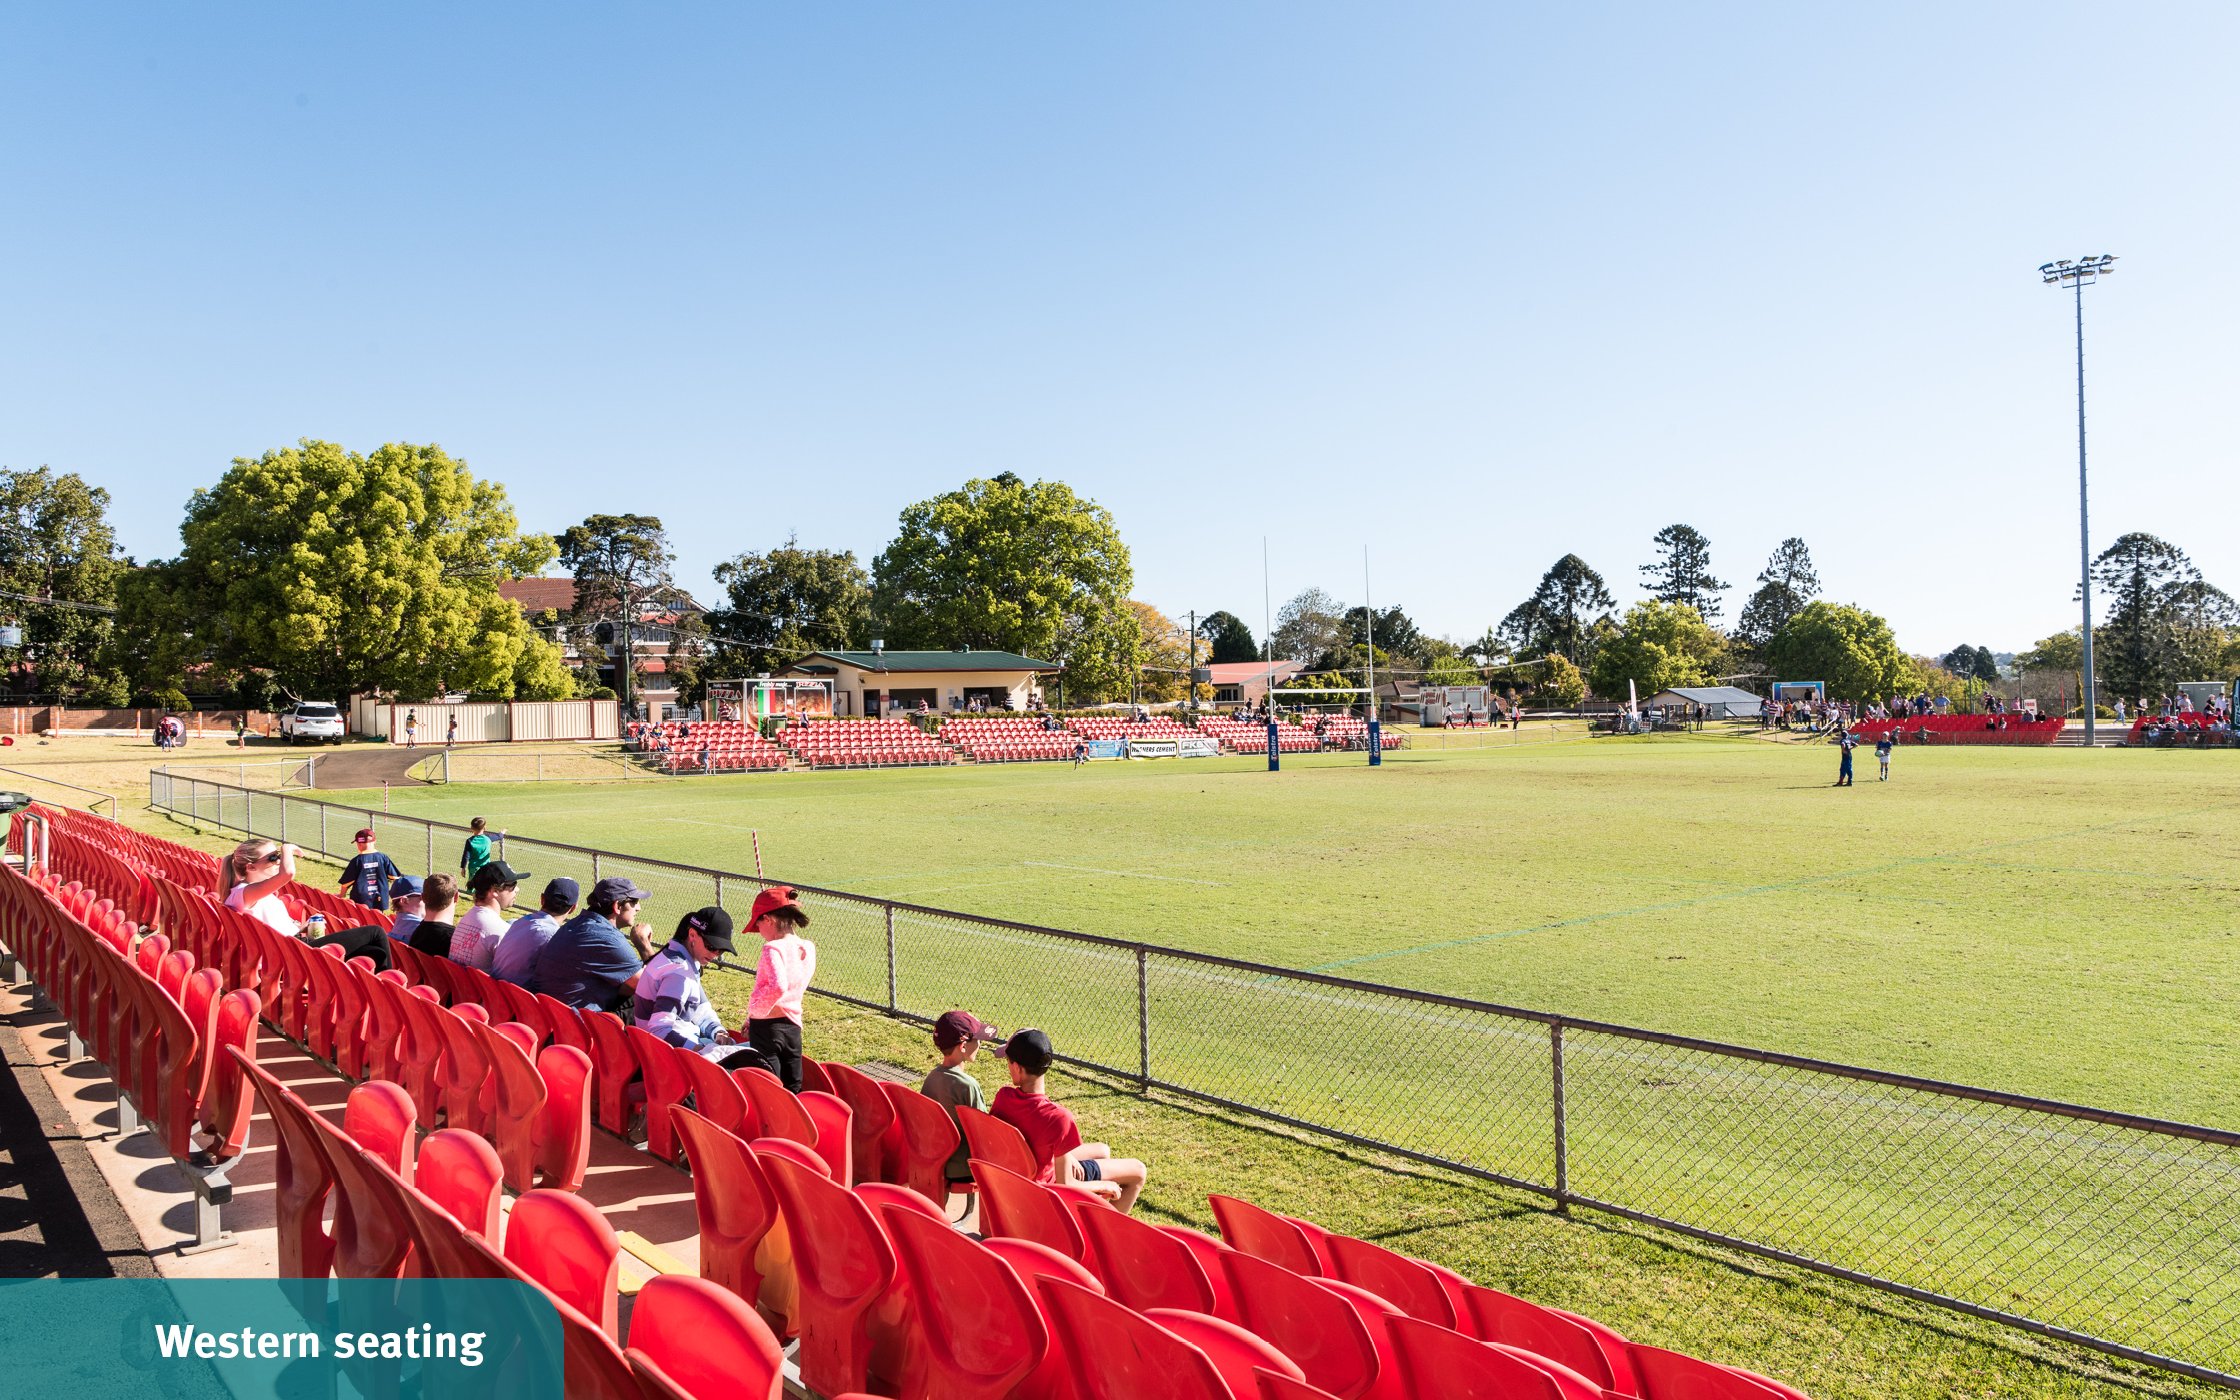 Spectators sitting in red outdoor seating watching the green field as they wait for a football game to begin at the Toowoomba Sports Grounds